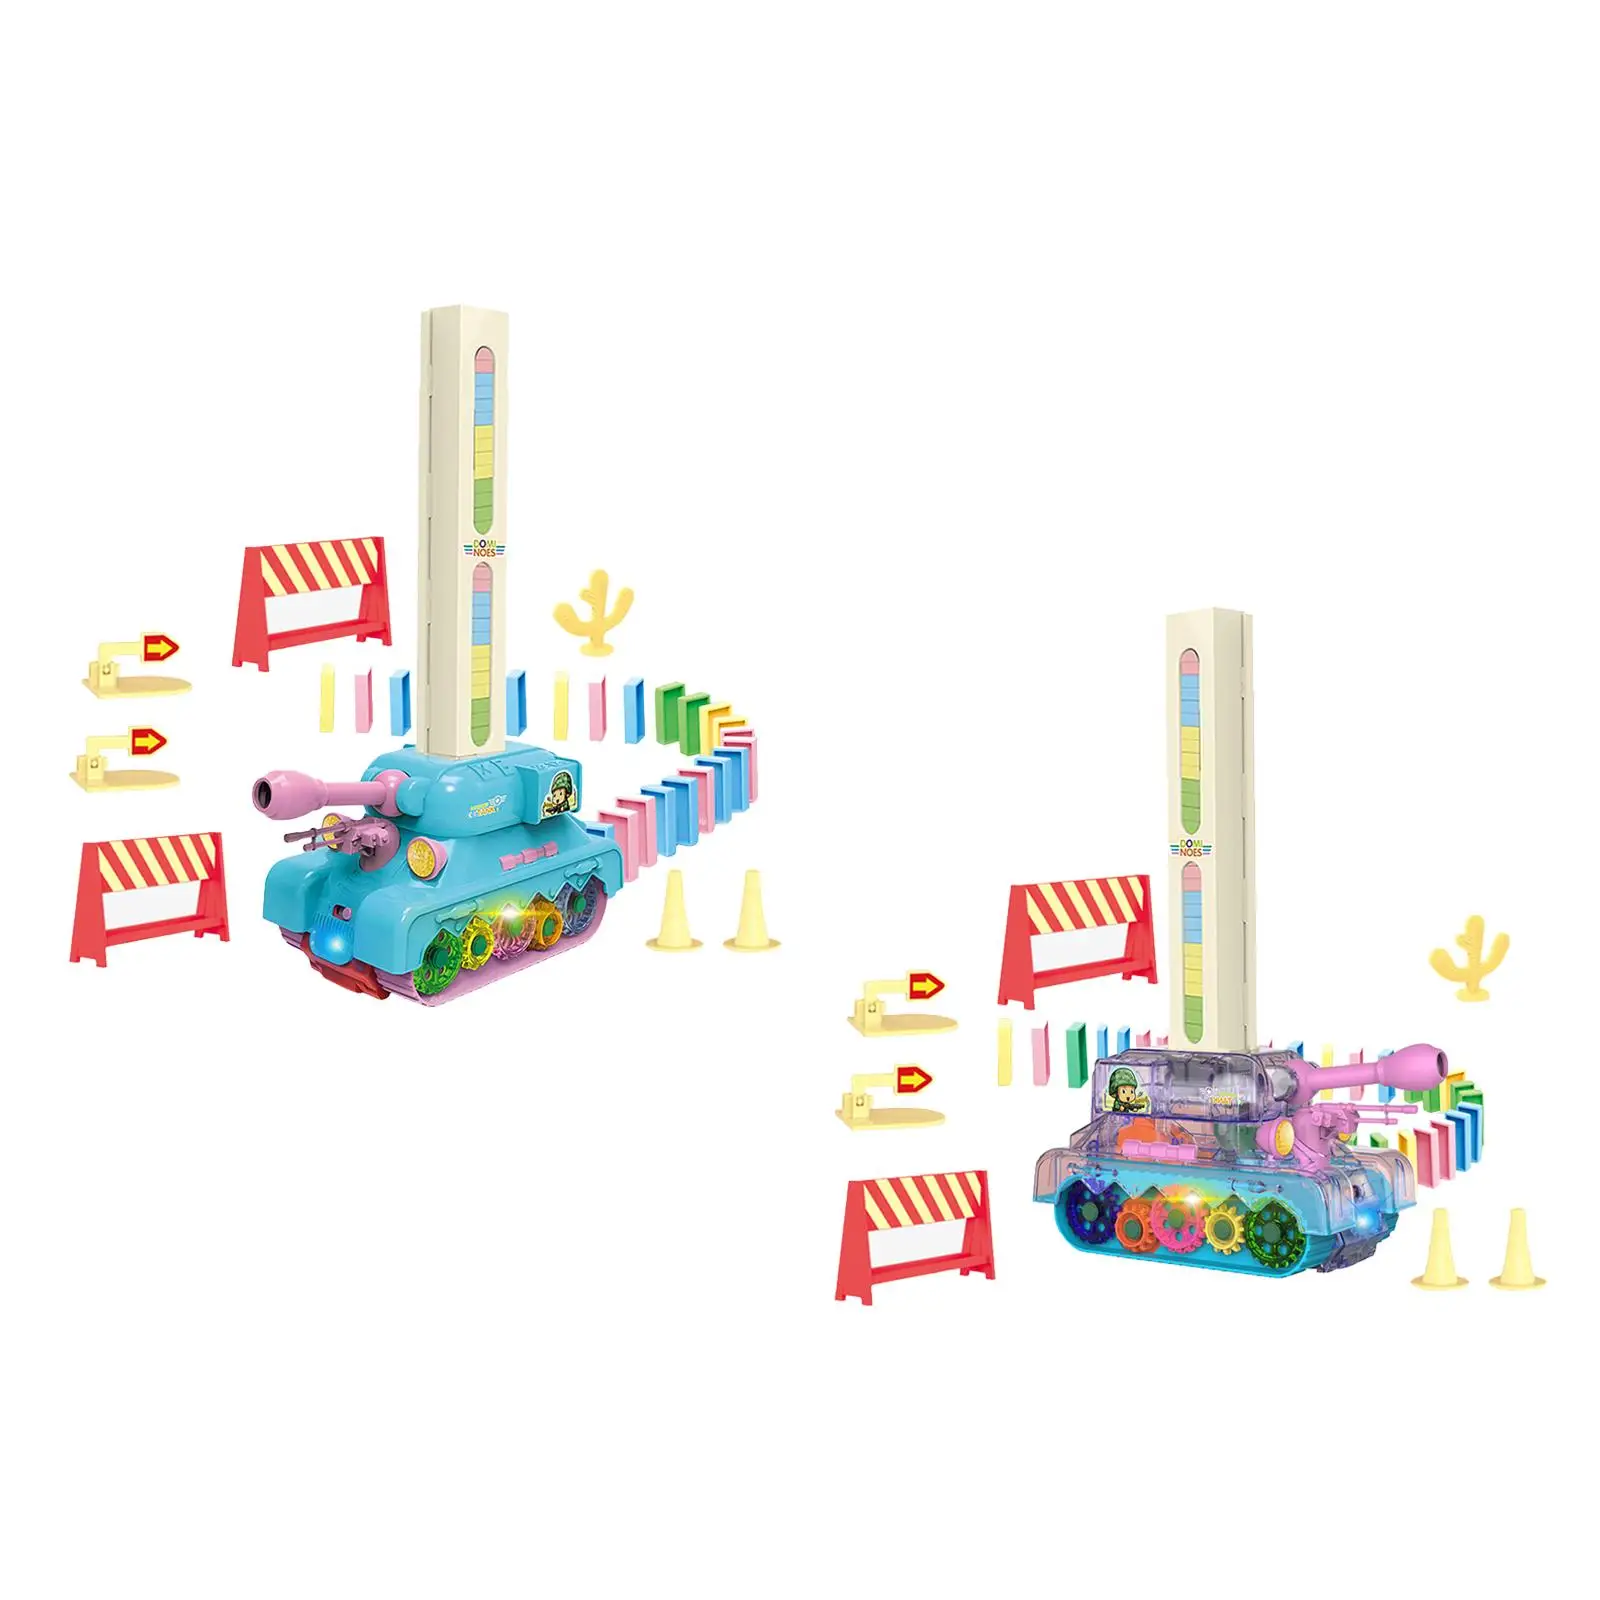 Electric Tank Blocks Set Laying Brick Blocks Games Early Learning Education Toys for Children Toddlers Kids Boys Birthday Gifts